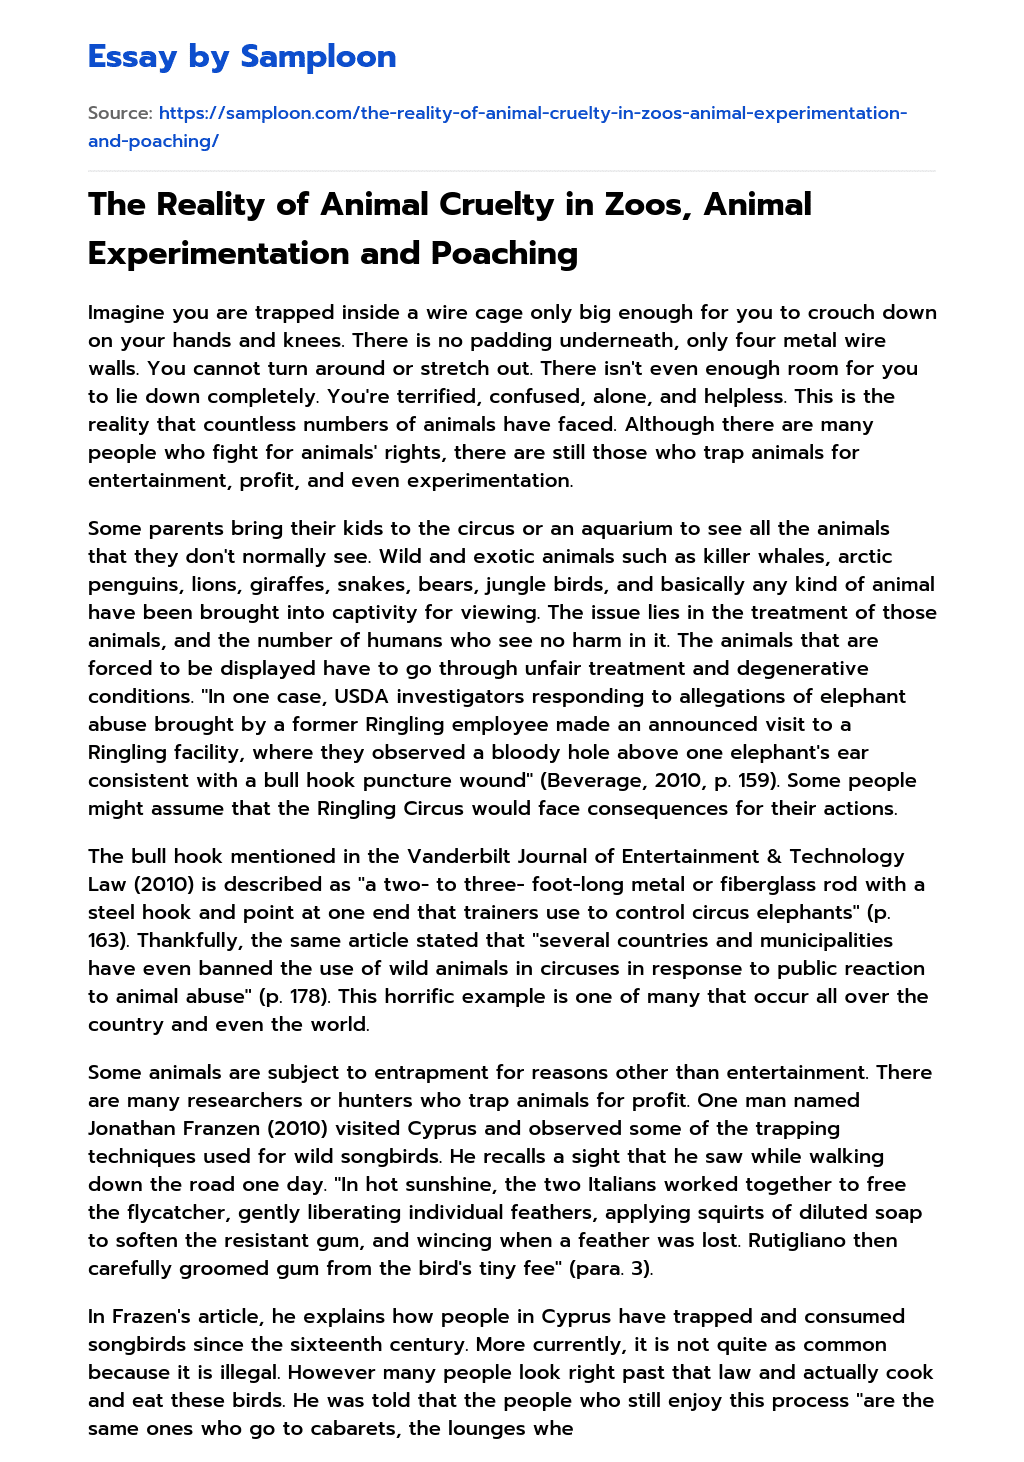 The Reality of Animal Cruelty in Zoos, Animal Experimentation and Poaching essay